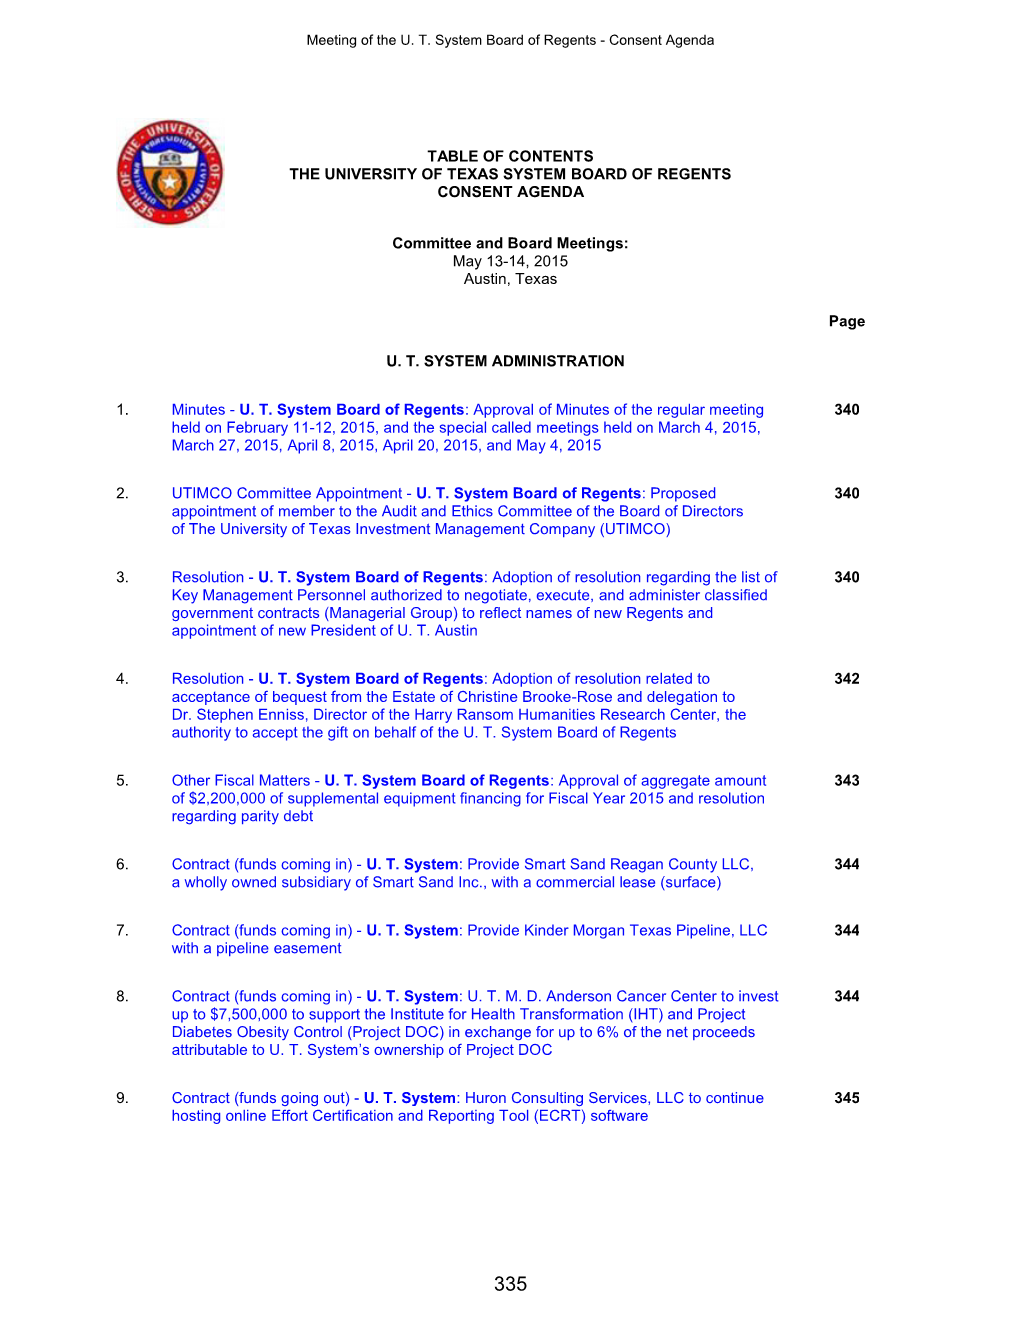 Table of Contents the University of Texas System Board of Regents Consent Agenda